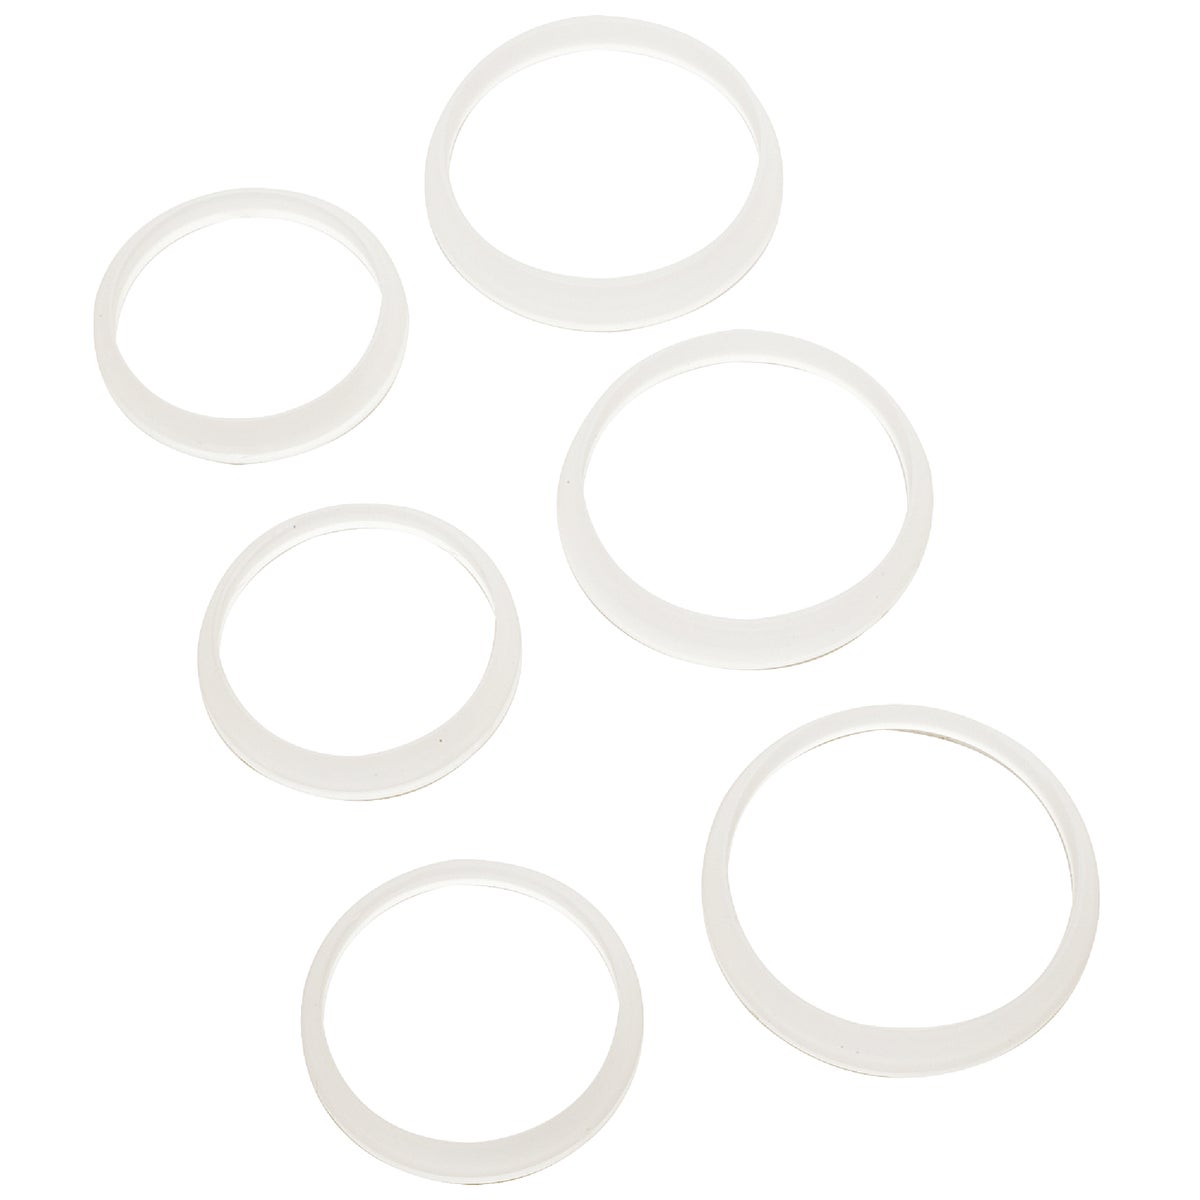 Item 416213, Poly slip-joint washers, 1-1/4" or 1-1/2" 6 per card (3 of each size